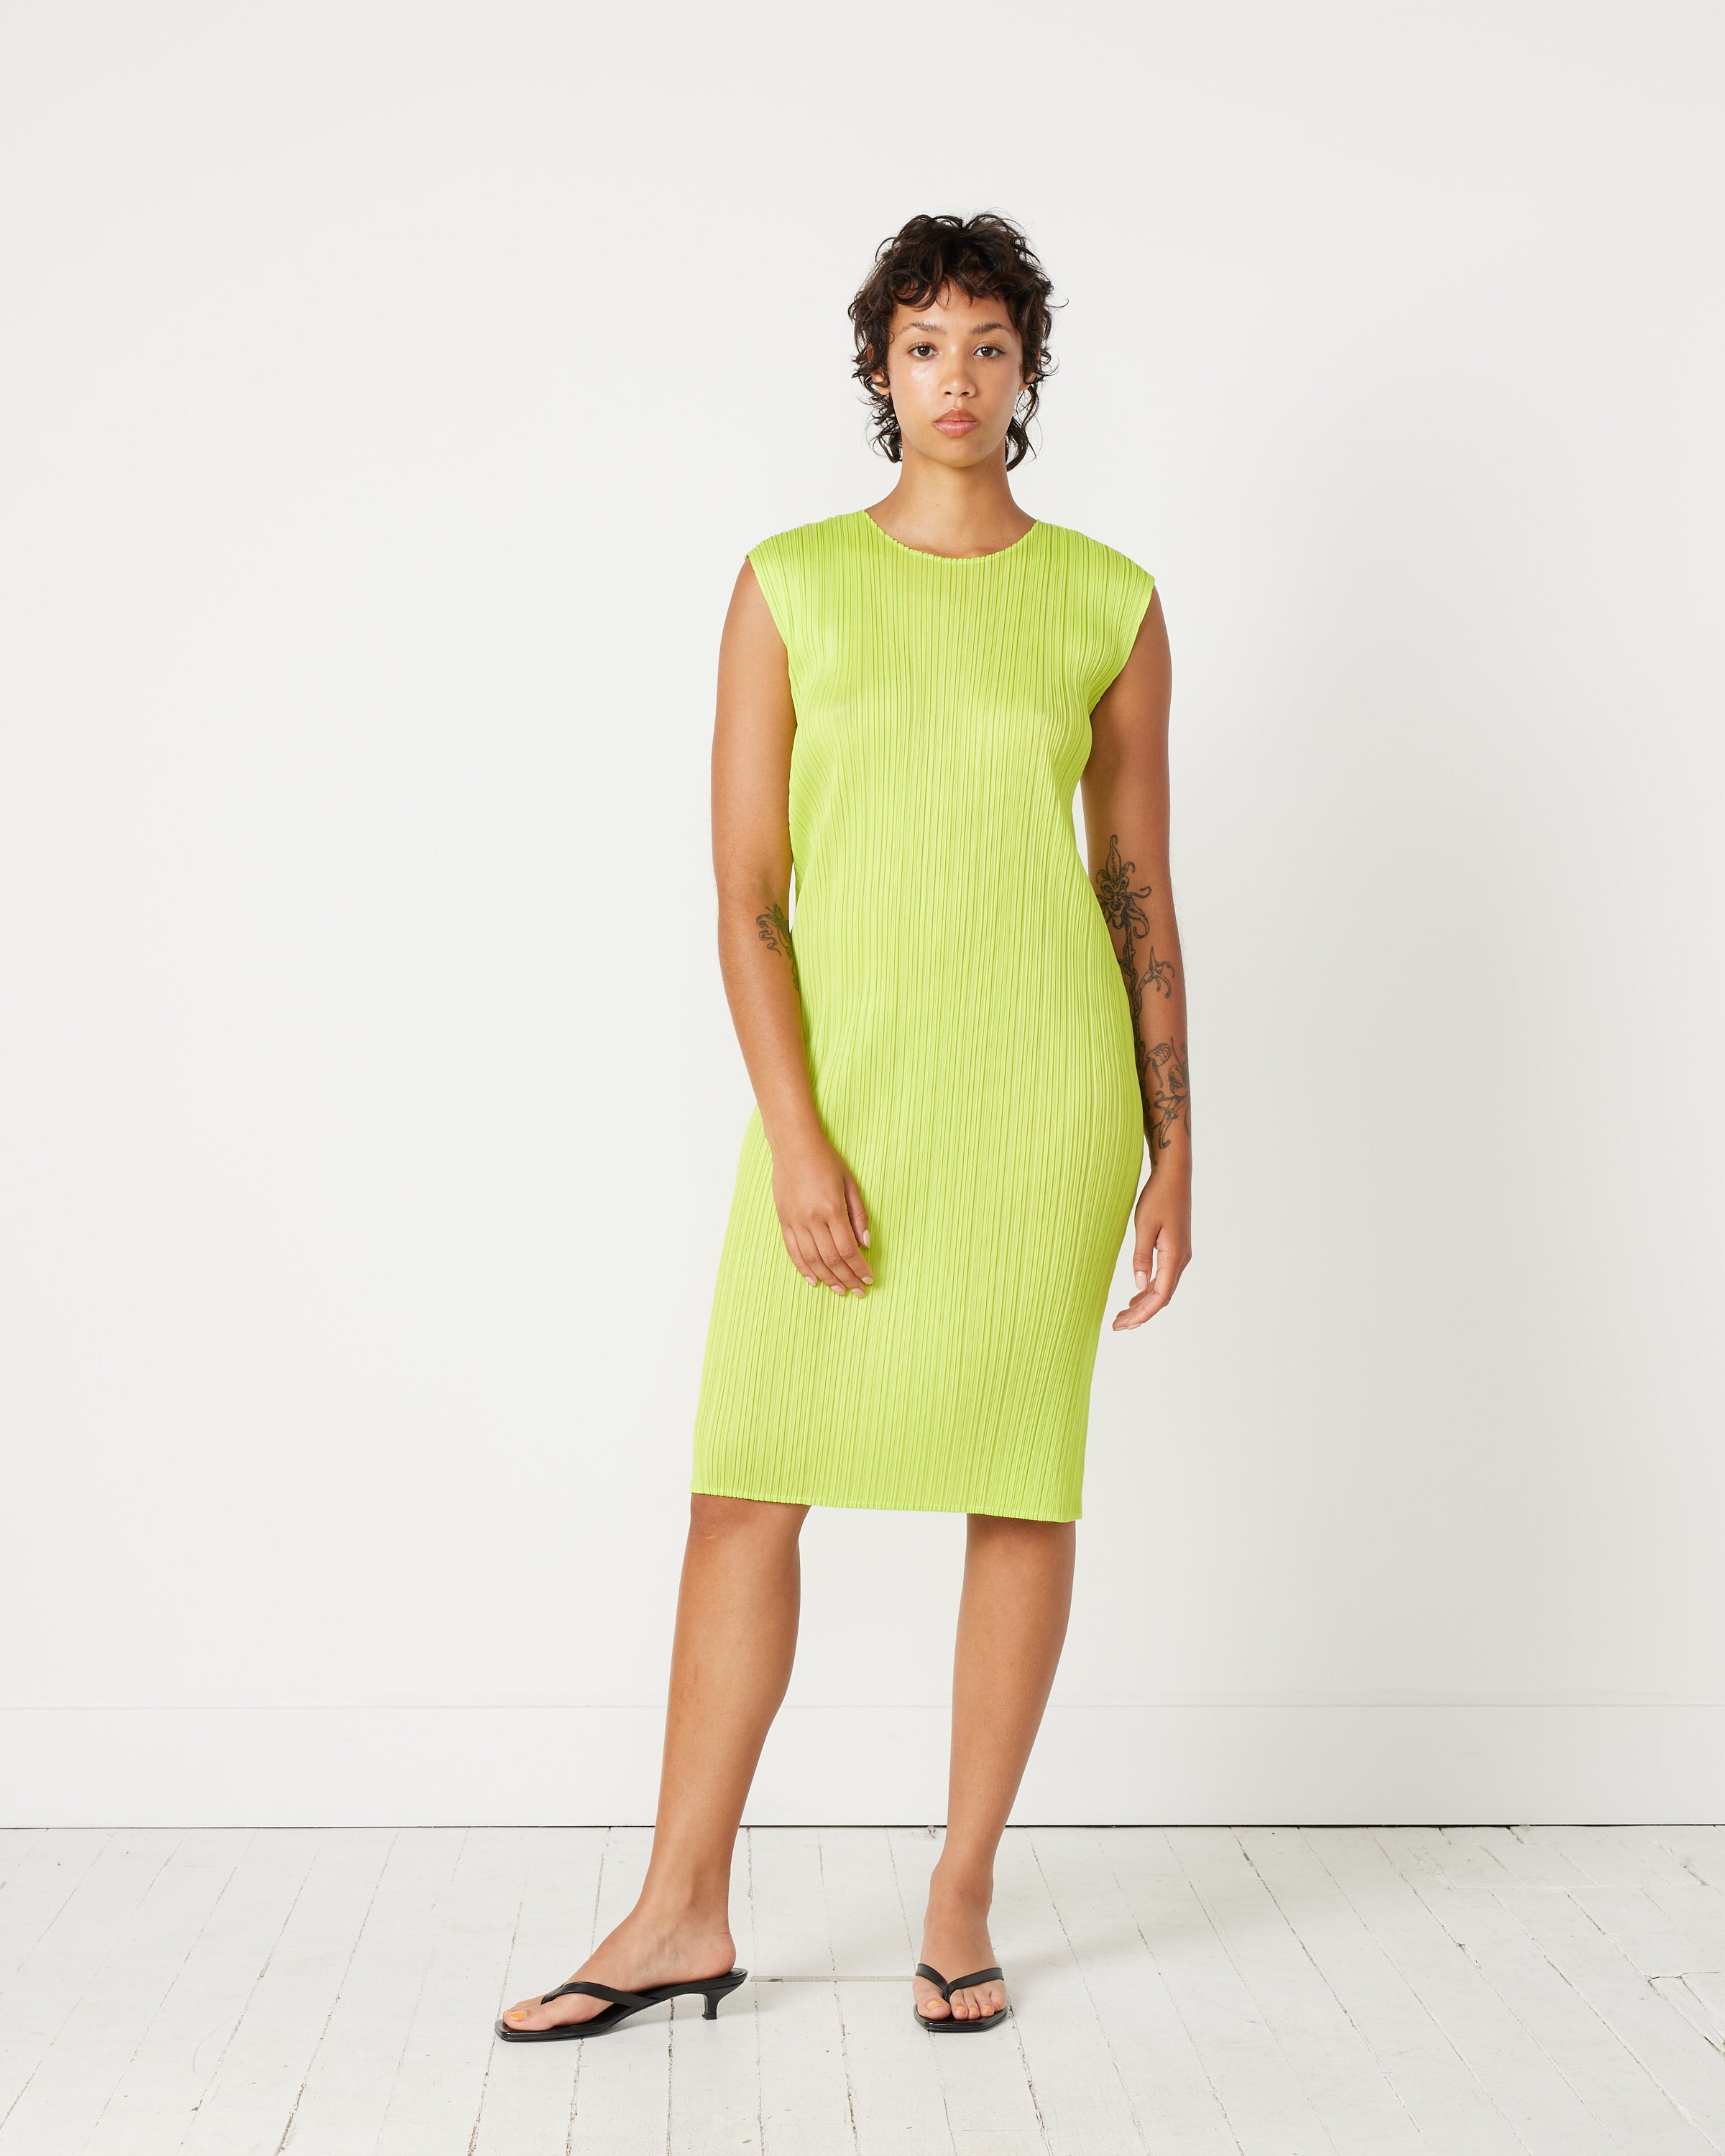 New Colorful Basics 3 Sleeveless Dress in Yellow Green by Pleats Please  Issey Miyake